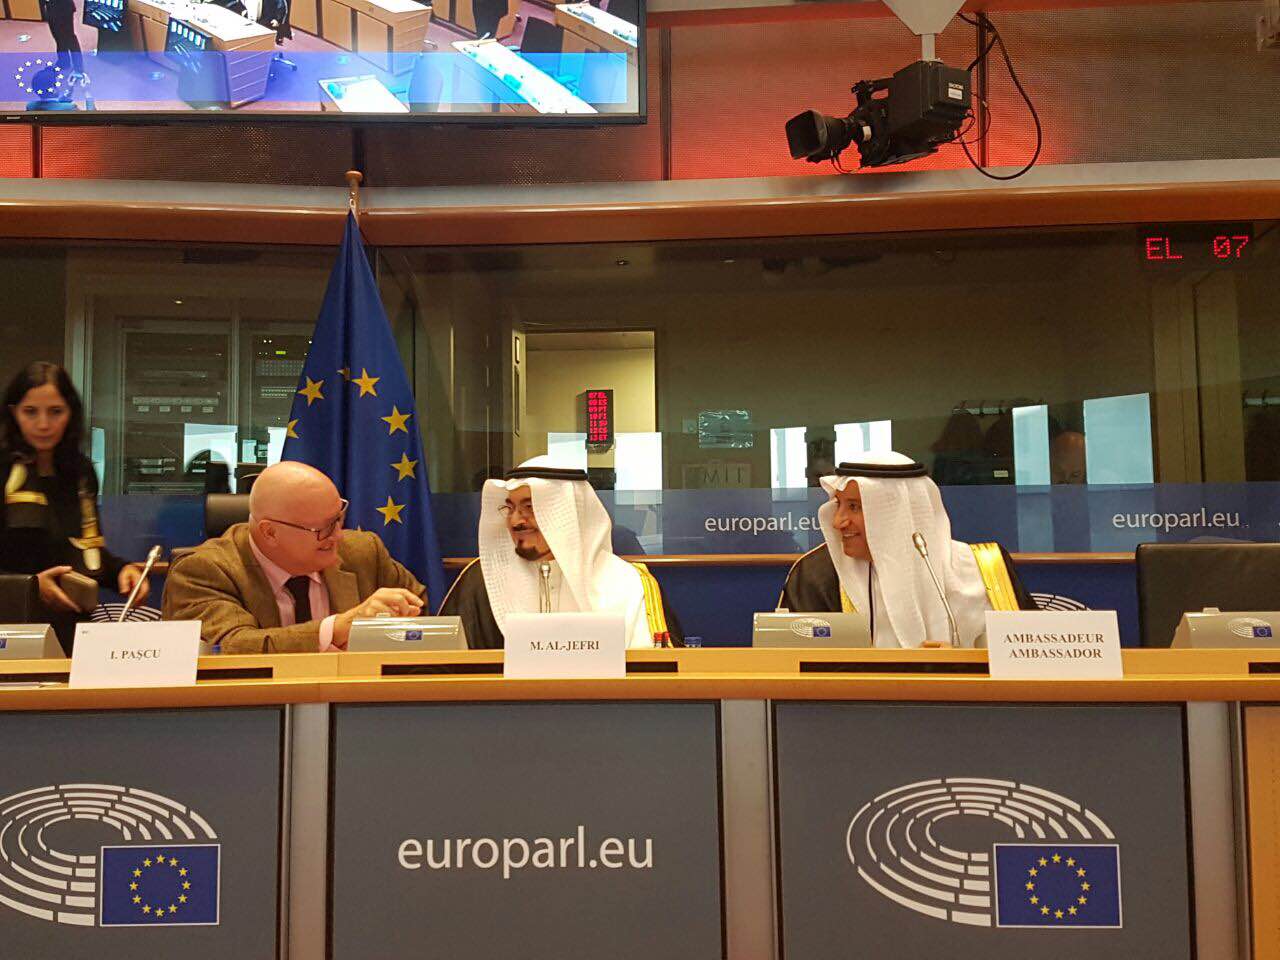 Useful exchange of views in Brussels with the Shura Council’s Dr al-Jefri